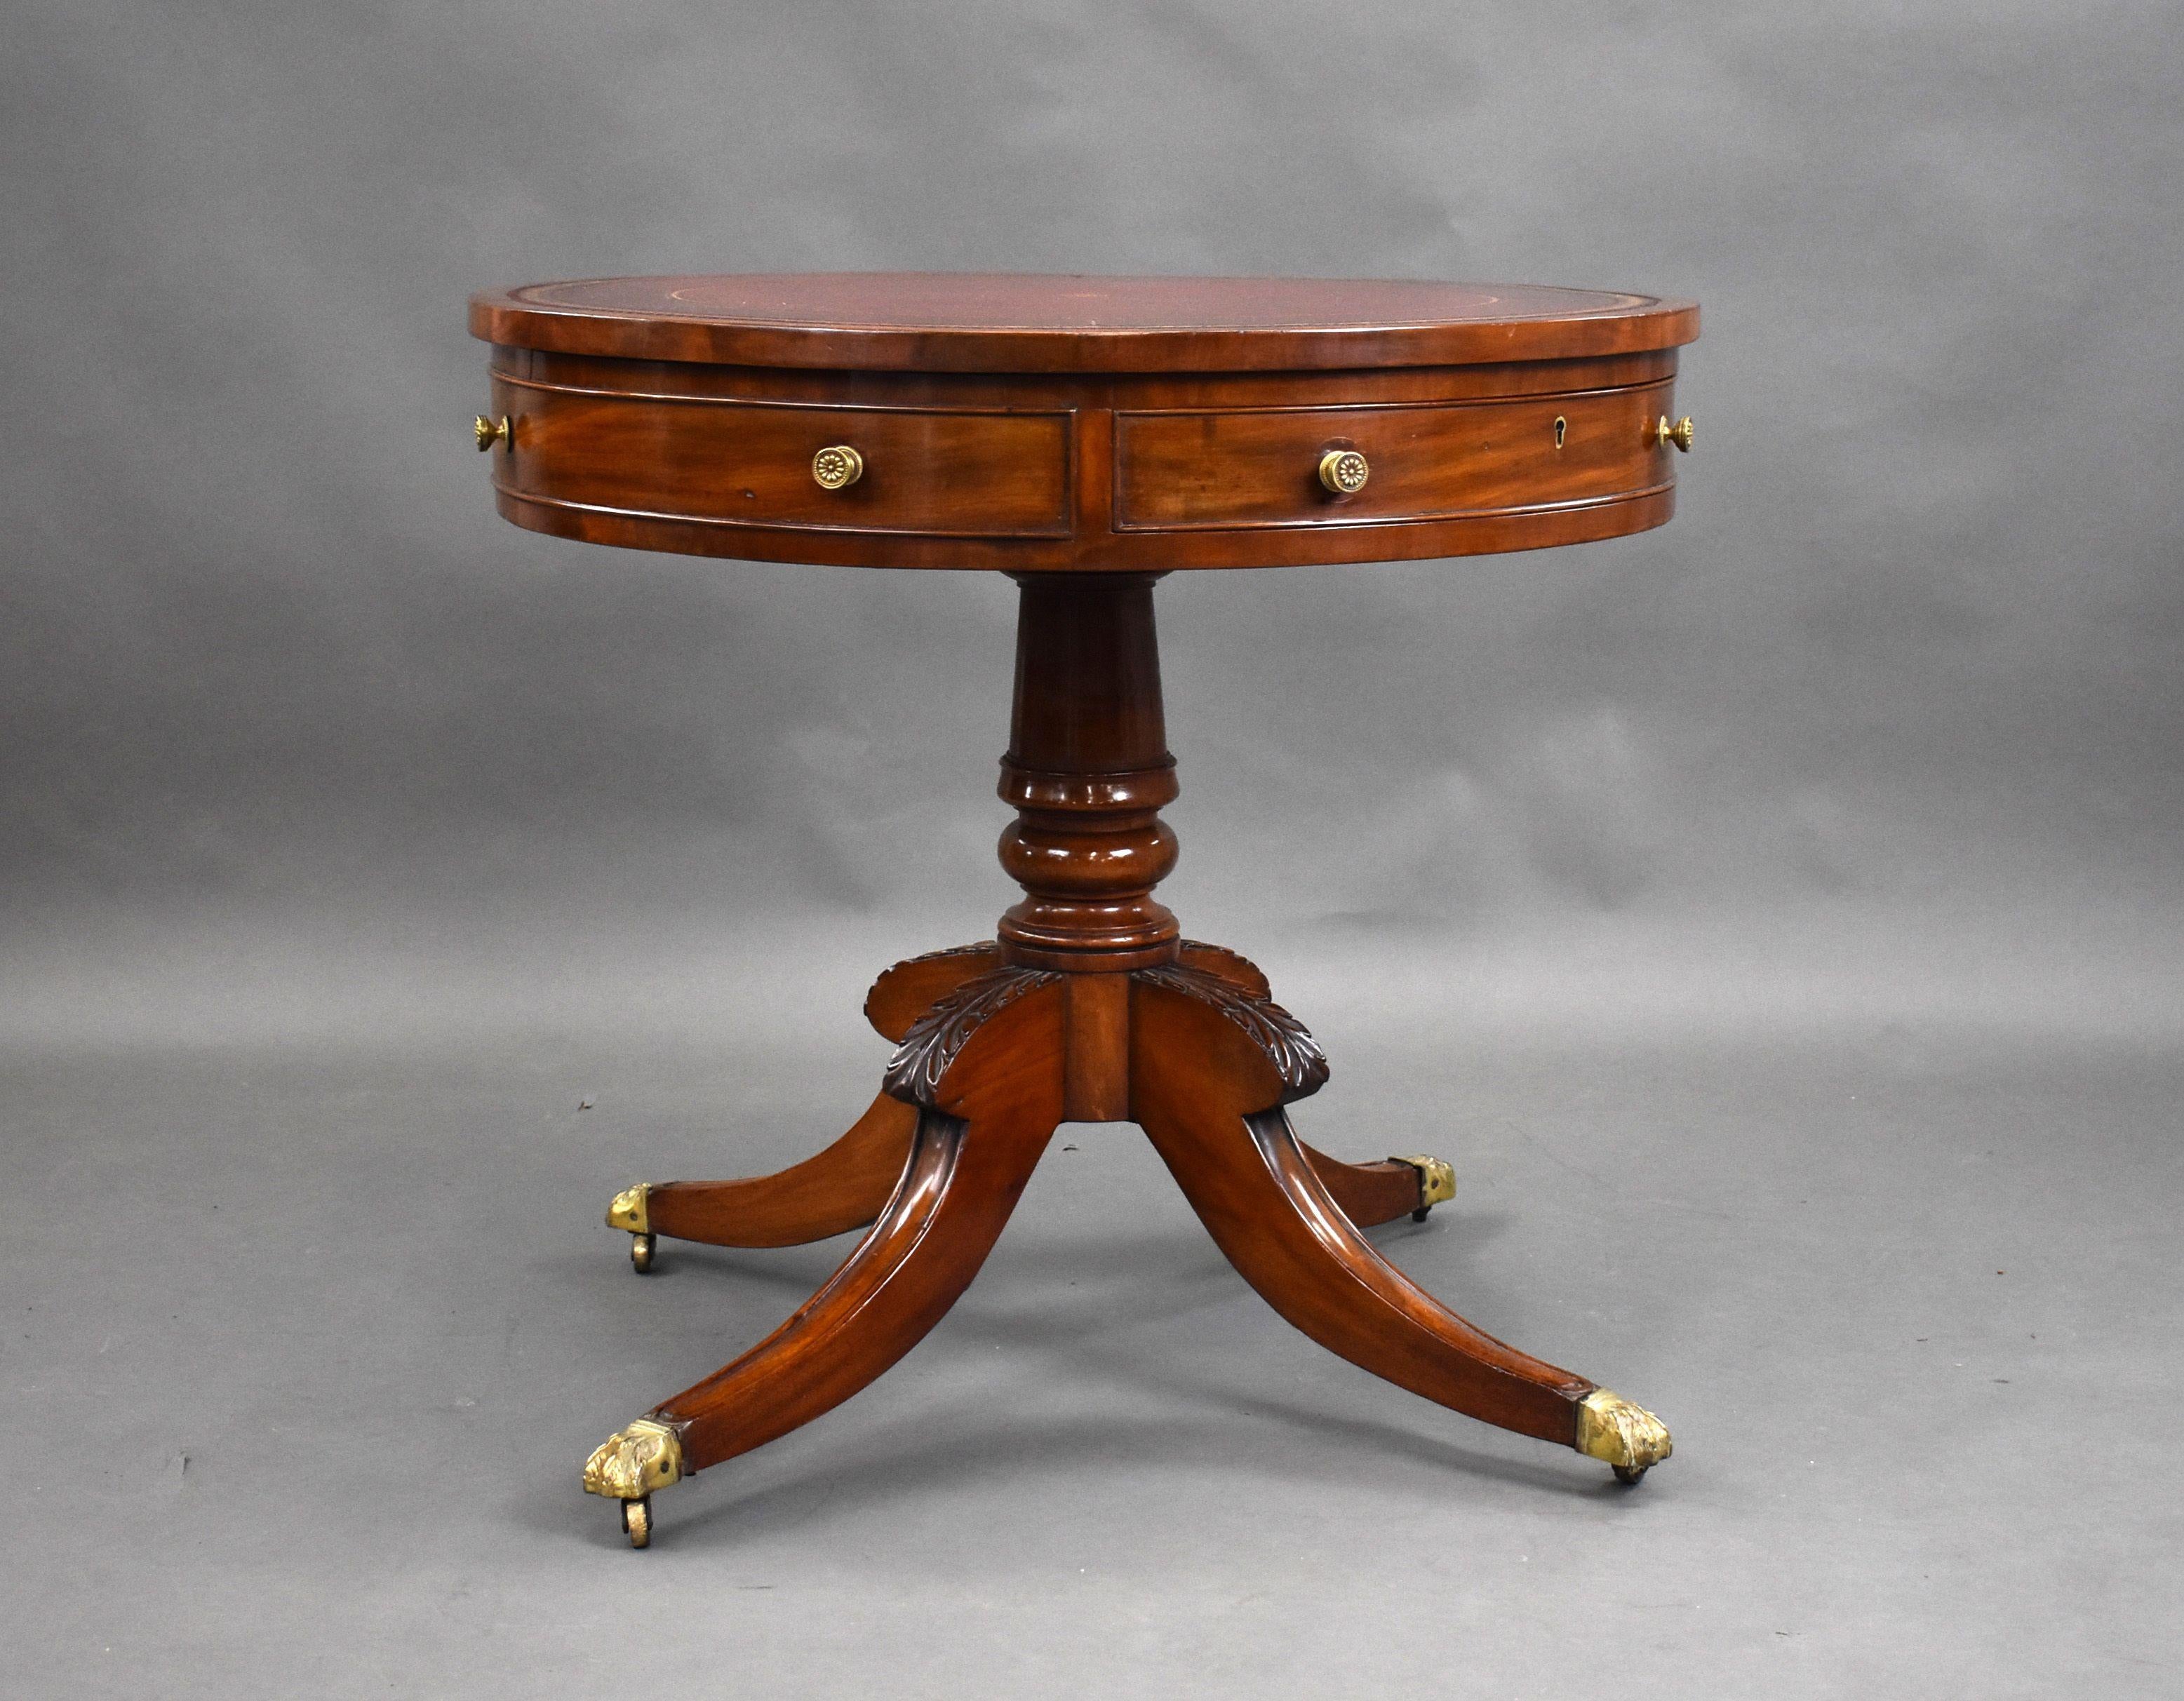 For sale is a fine quality Regency mahogany drum table of small proportions, labelled Druce & Co. Having a red leather top, decorated with gold tooling, the table is fitted with two drawers and two faux drawers above a turned stem standing on